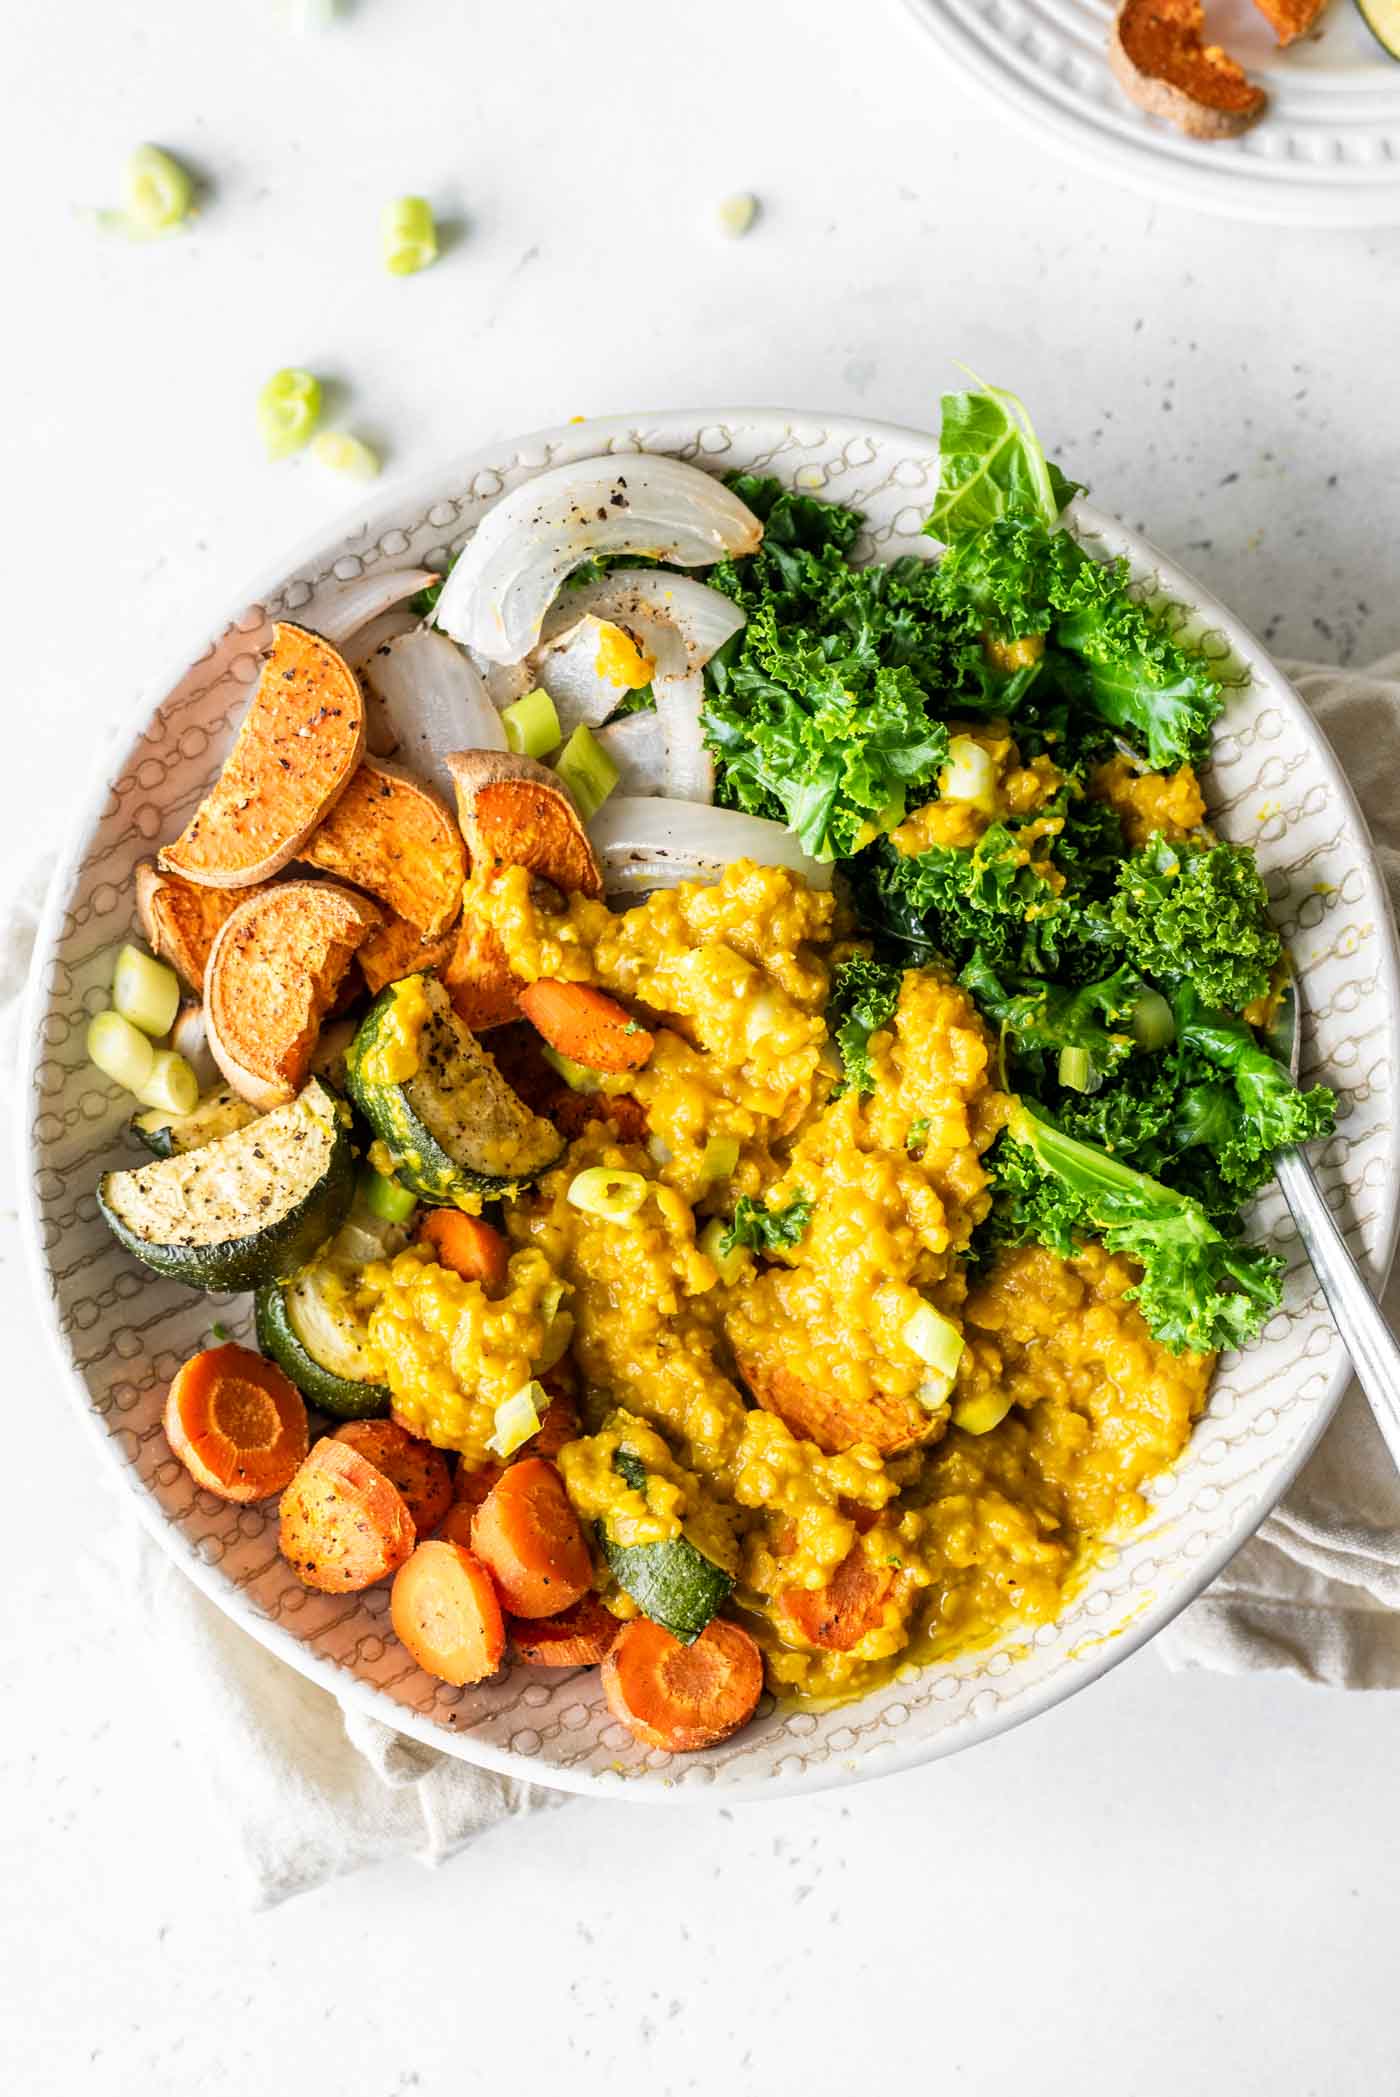 Curried Lentil Bowl with Roasted Vegetables - Running on Real Food